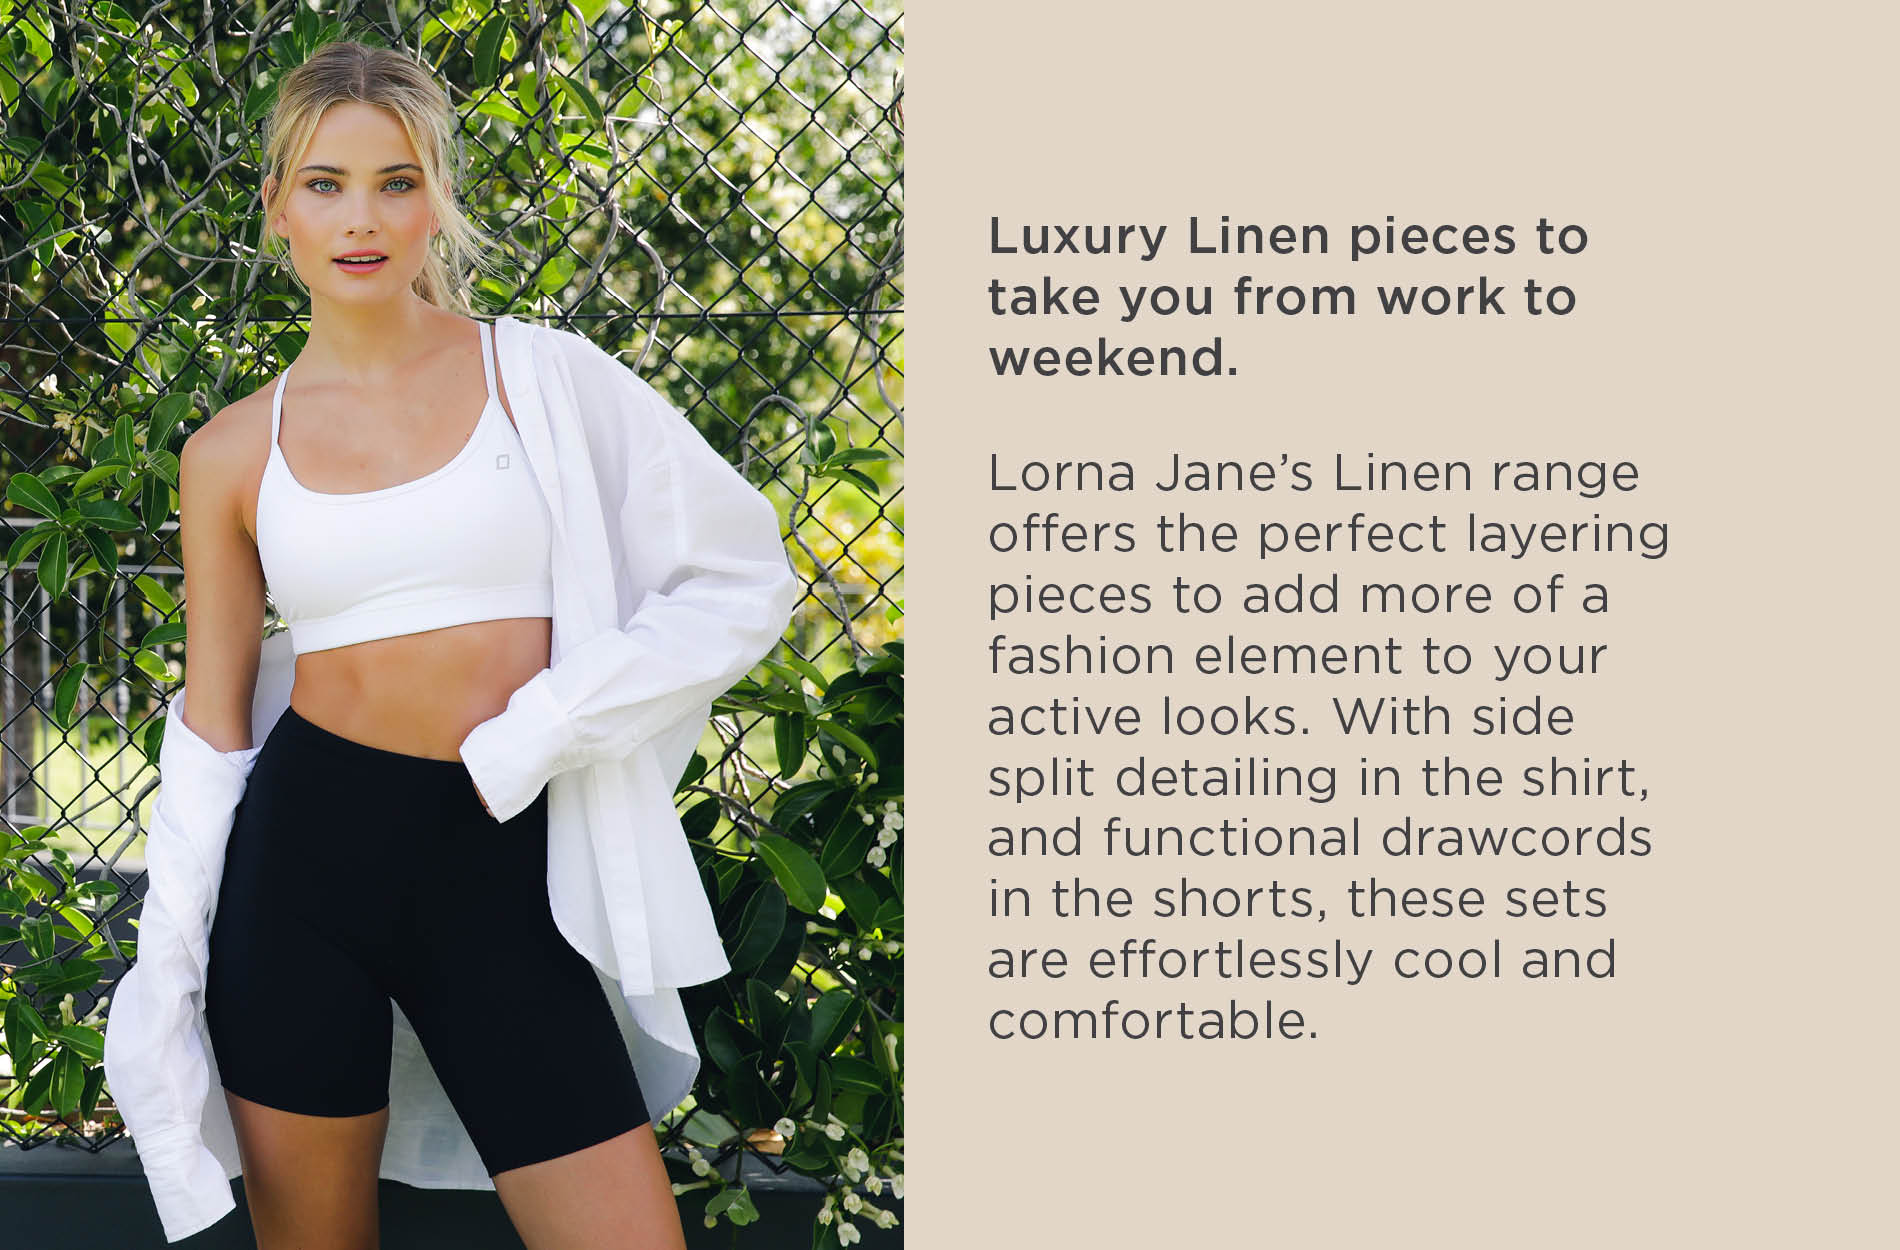 The Lorna Jane Linen Loungewear Collection Information